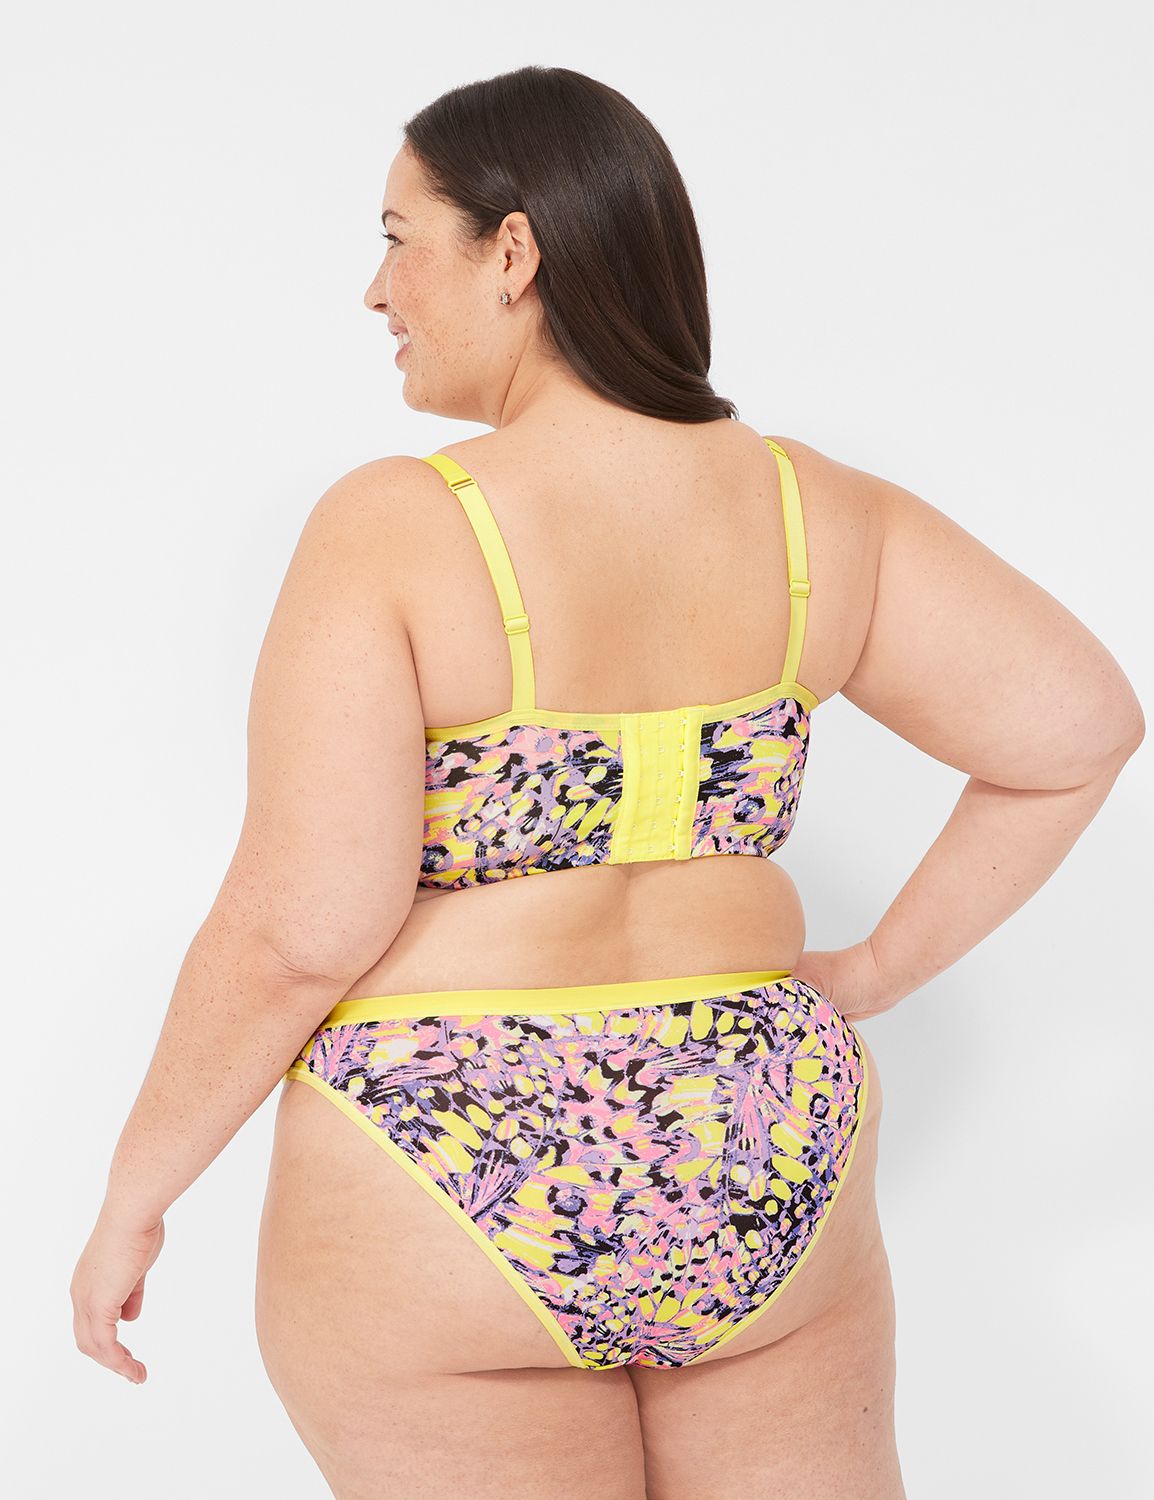 Lane Bryant - The Seriously Sexy Collection. Because, reallywho needs  mistletoe? 😏 Check out Cacique for even more sexy (if you can handle it).  Shop